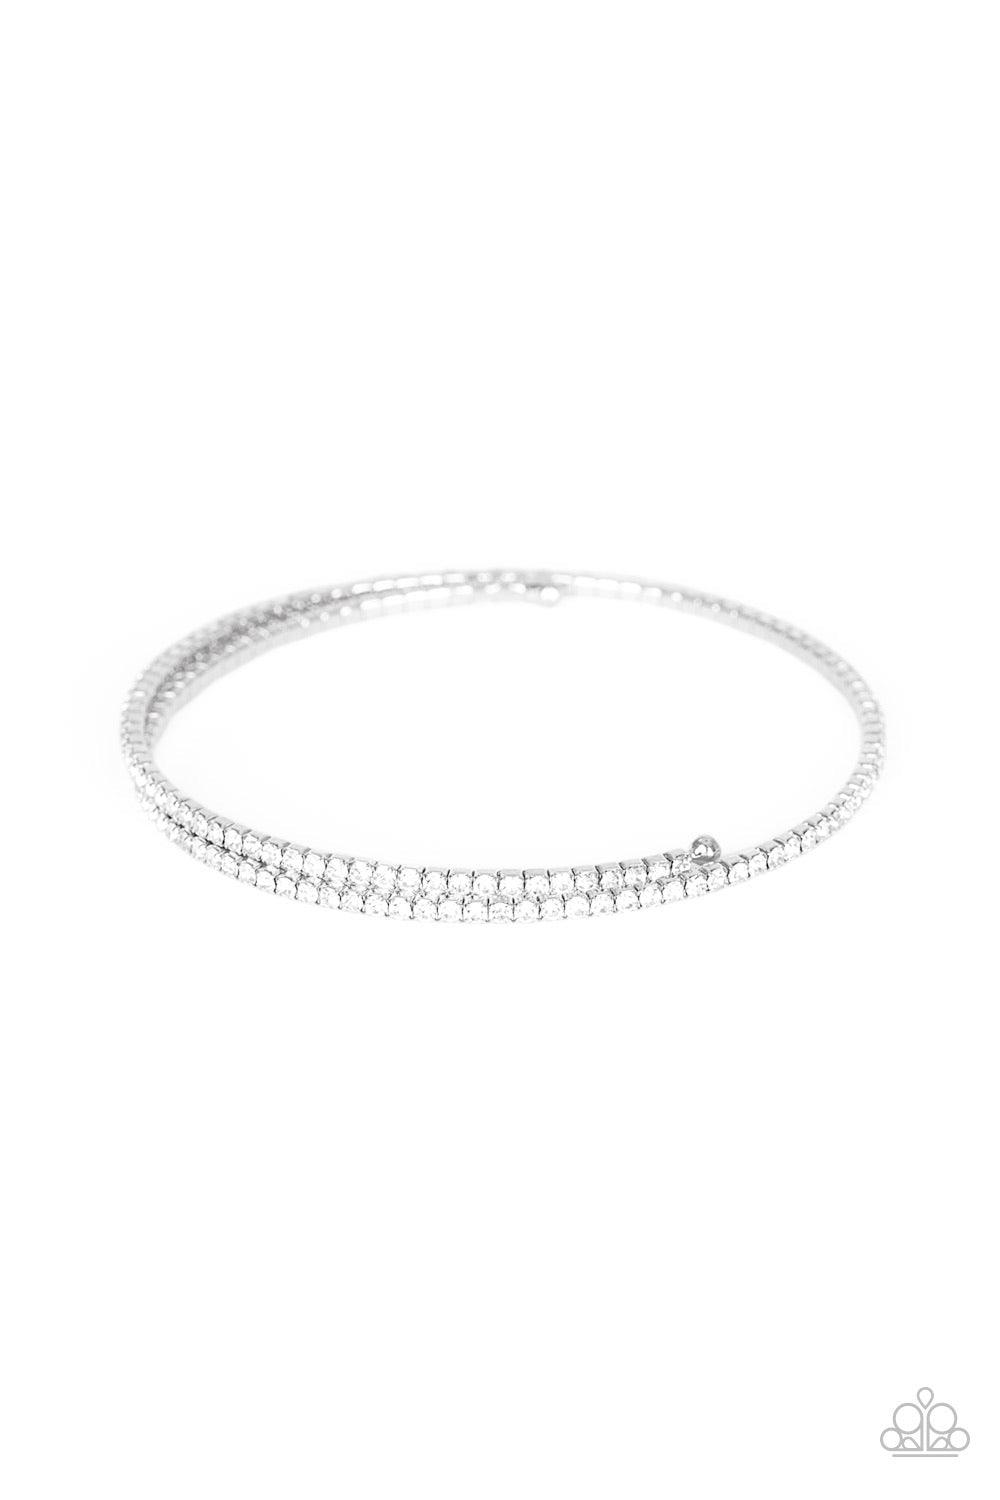 Paparazzi Accessories Sleek Sparkle - White Dotted in dainty white rhinestones, a flexible wire coils around the wrist for a refined flair. Jewelry